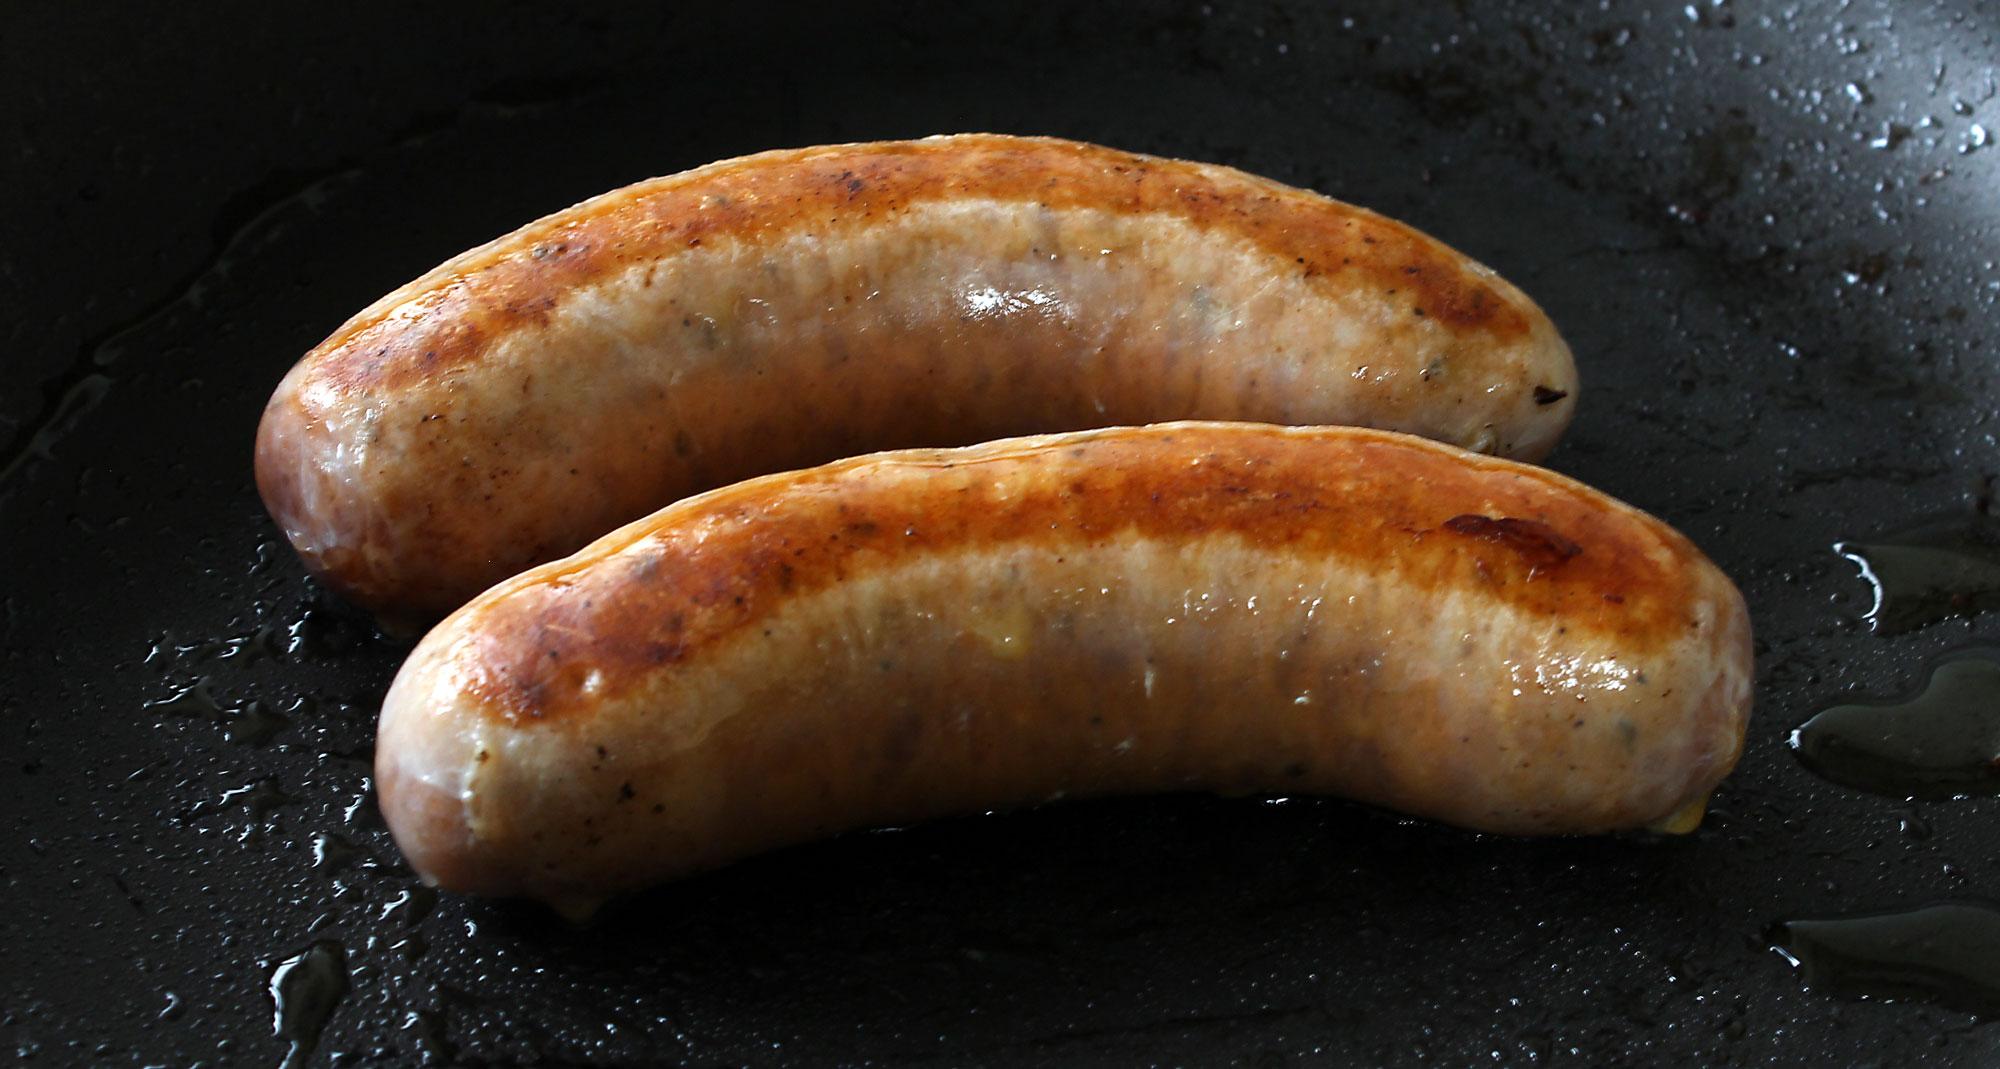 THE MEAT GUY’S SAUSAGE COOKING METHOD